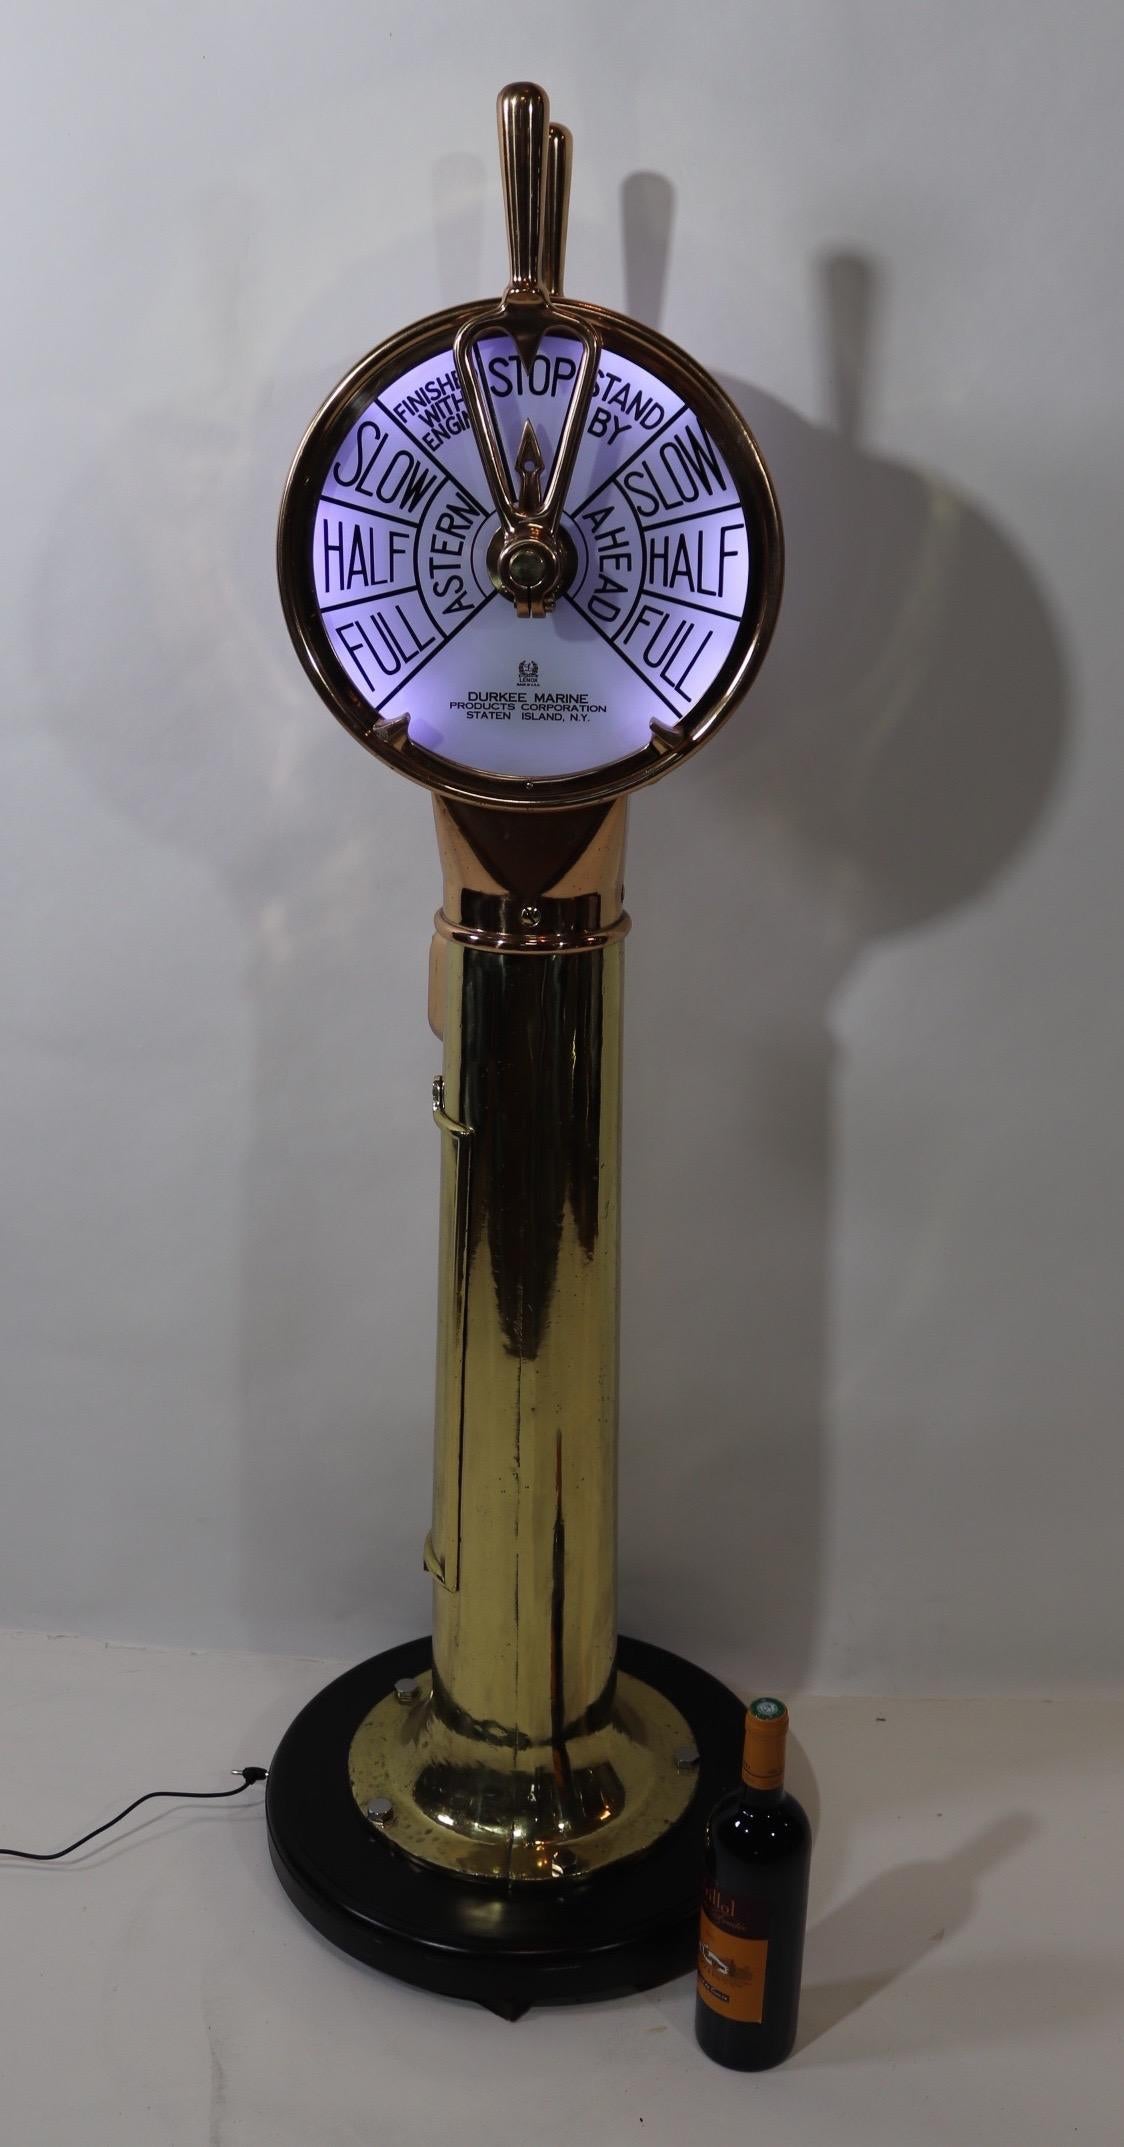 Solid brass ships engine order telegraph with faceplates from Durkee Marine Products Corporation of Staten Island New York. Faceplates by Lenox. Highly polished and lacquered, this unit gleams like solid gold. Fitted to a thick wood base with routed